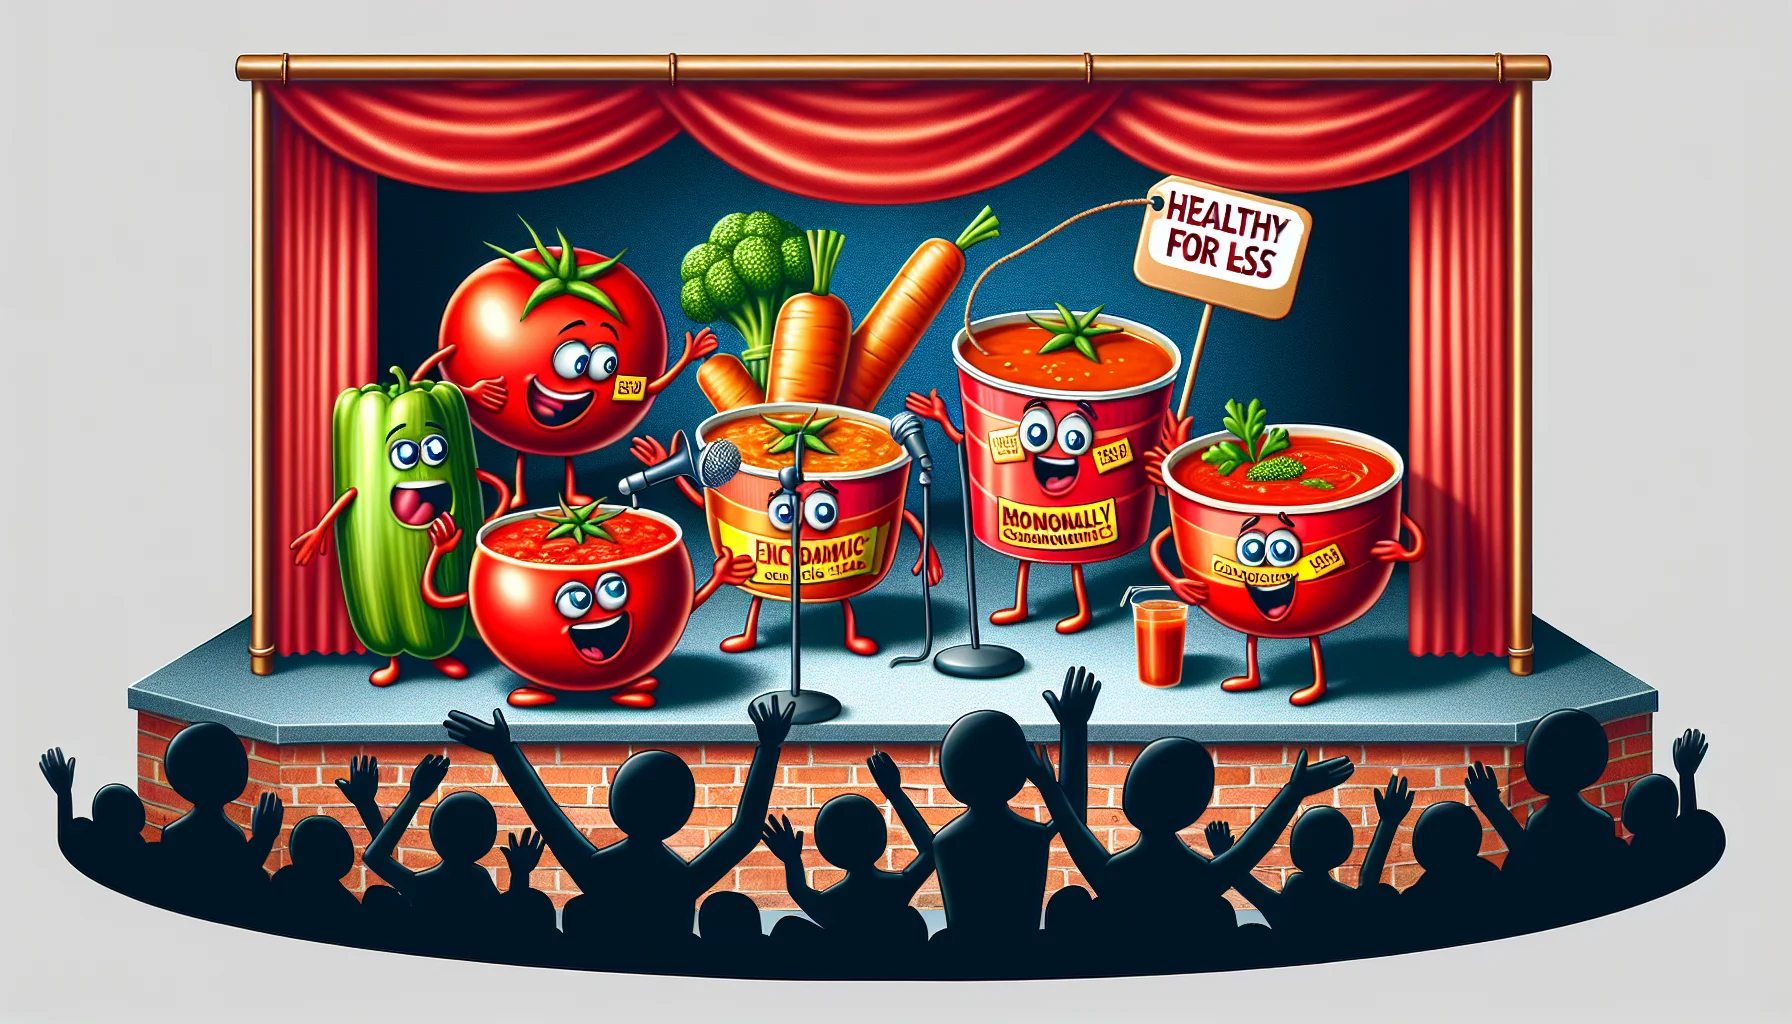 Generate a humorous and realistic image of a variety of tomato-based soups playfully 'acting' in a theatrical manner. They are presenting and advertising themselves to an audience. Each soup has a character, with the most lavish being an economical one - it wears a price tag that says 'healthy for less'. Make sure to add some vegetable characters in the background relating to tomato - carrots, bell peppers, onions, etc. - applauding and cheering them on. The message should be quirky yet inspiring, showcasing that eating healthy does not have to be expensive.